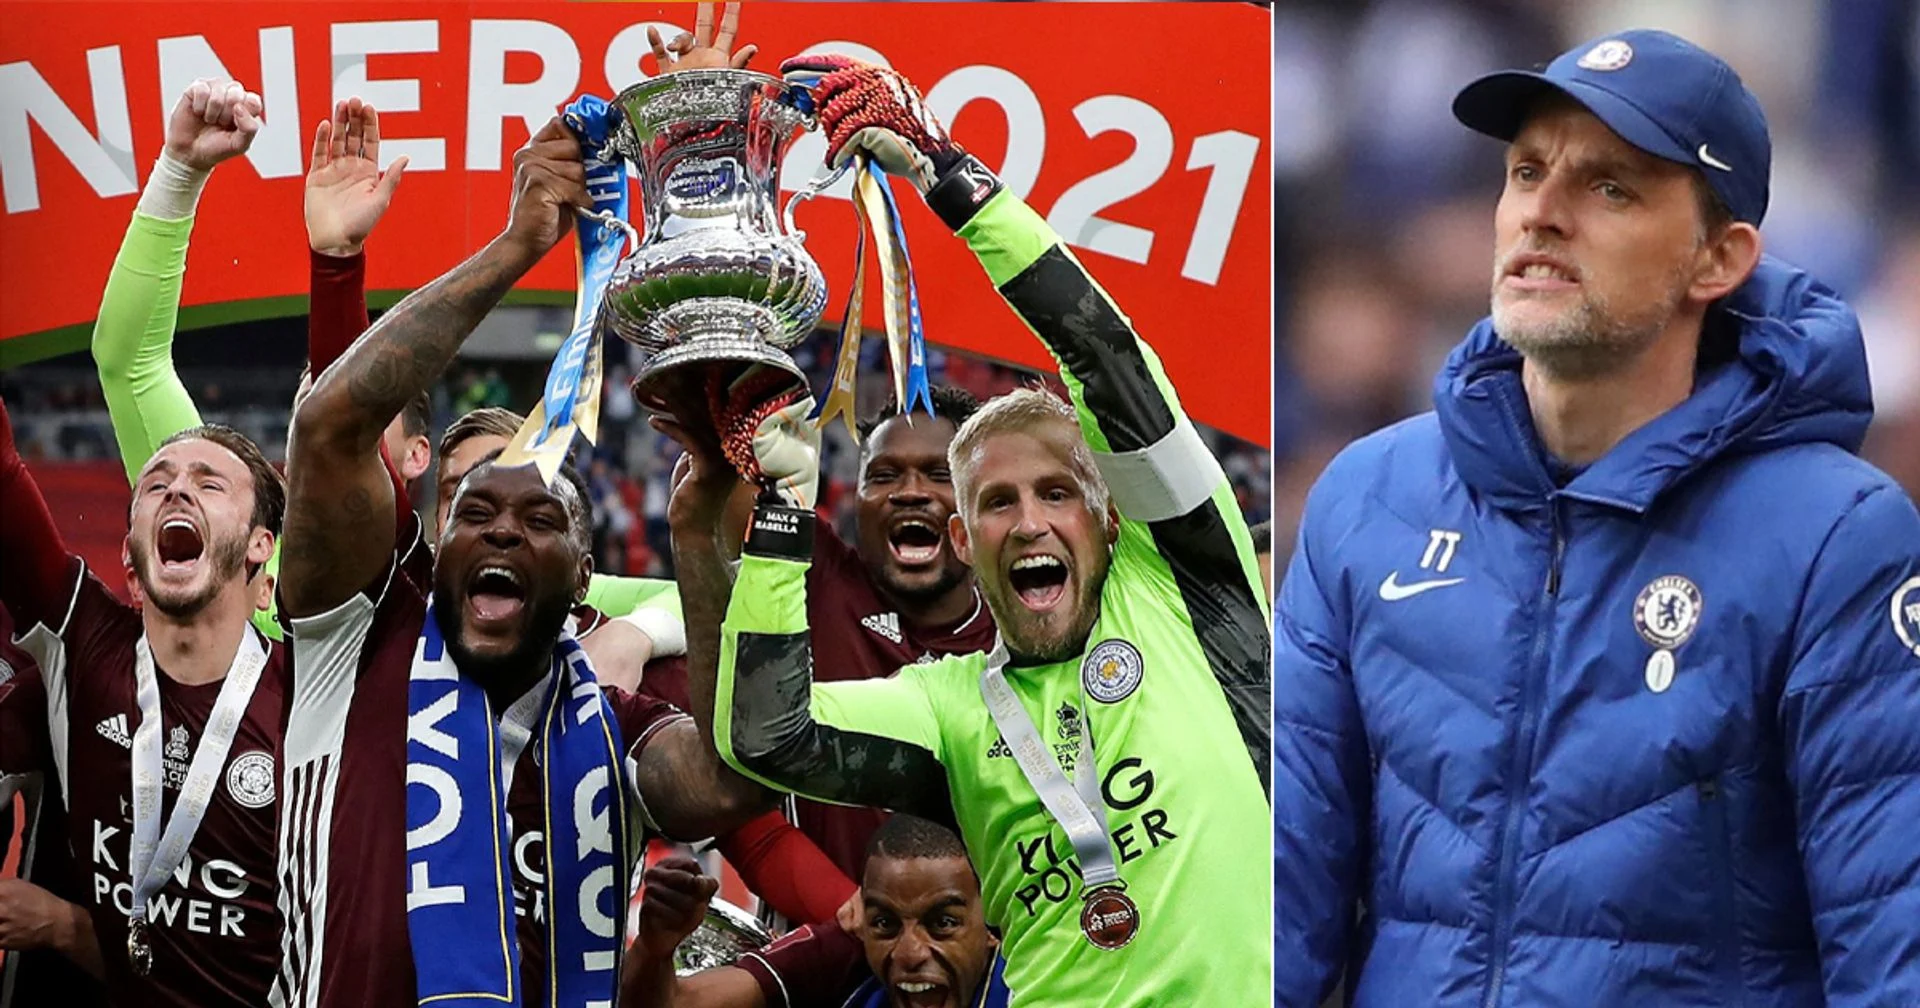 Third time lucky? Chelsea look to end losing streak in FA Cup finals